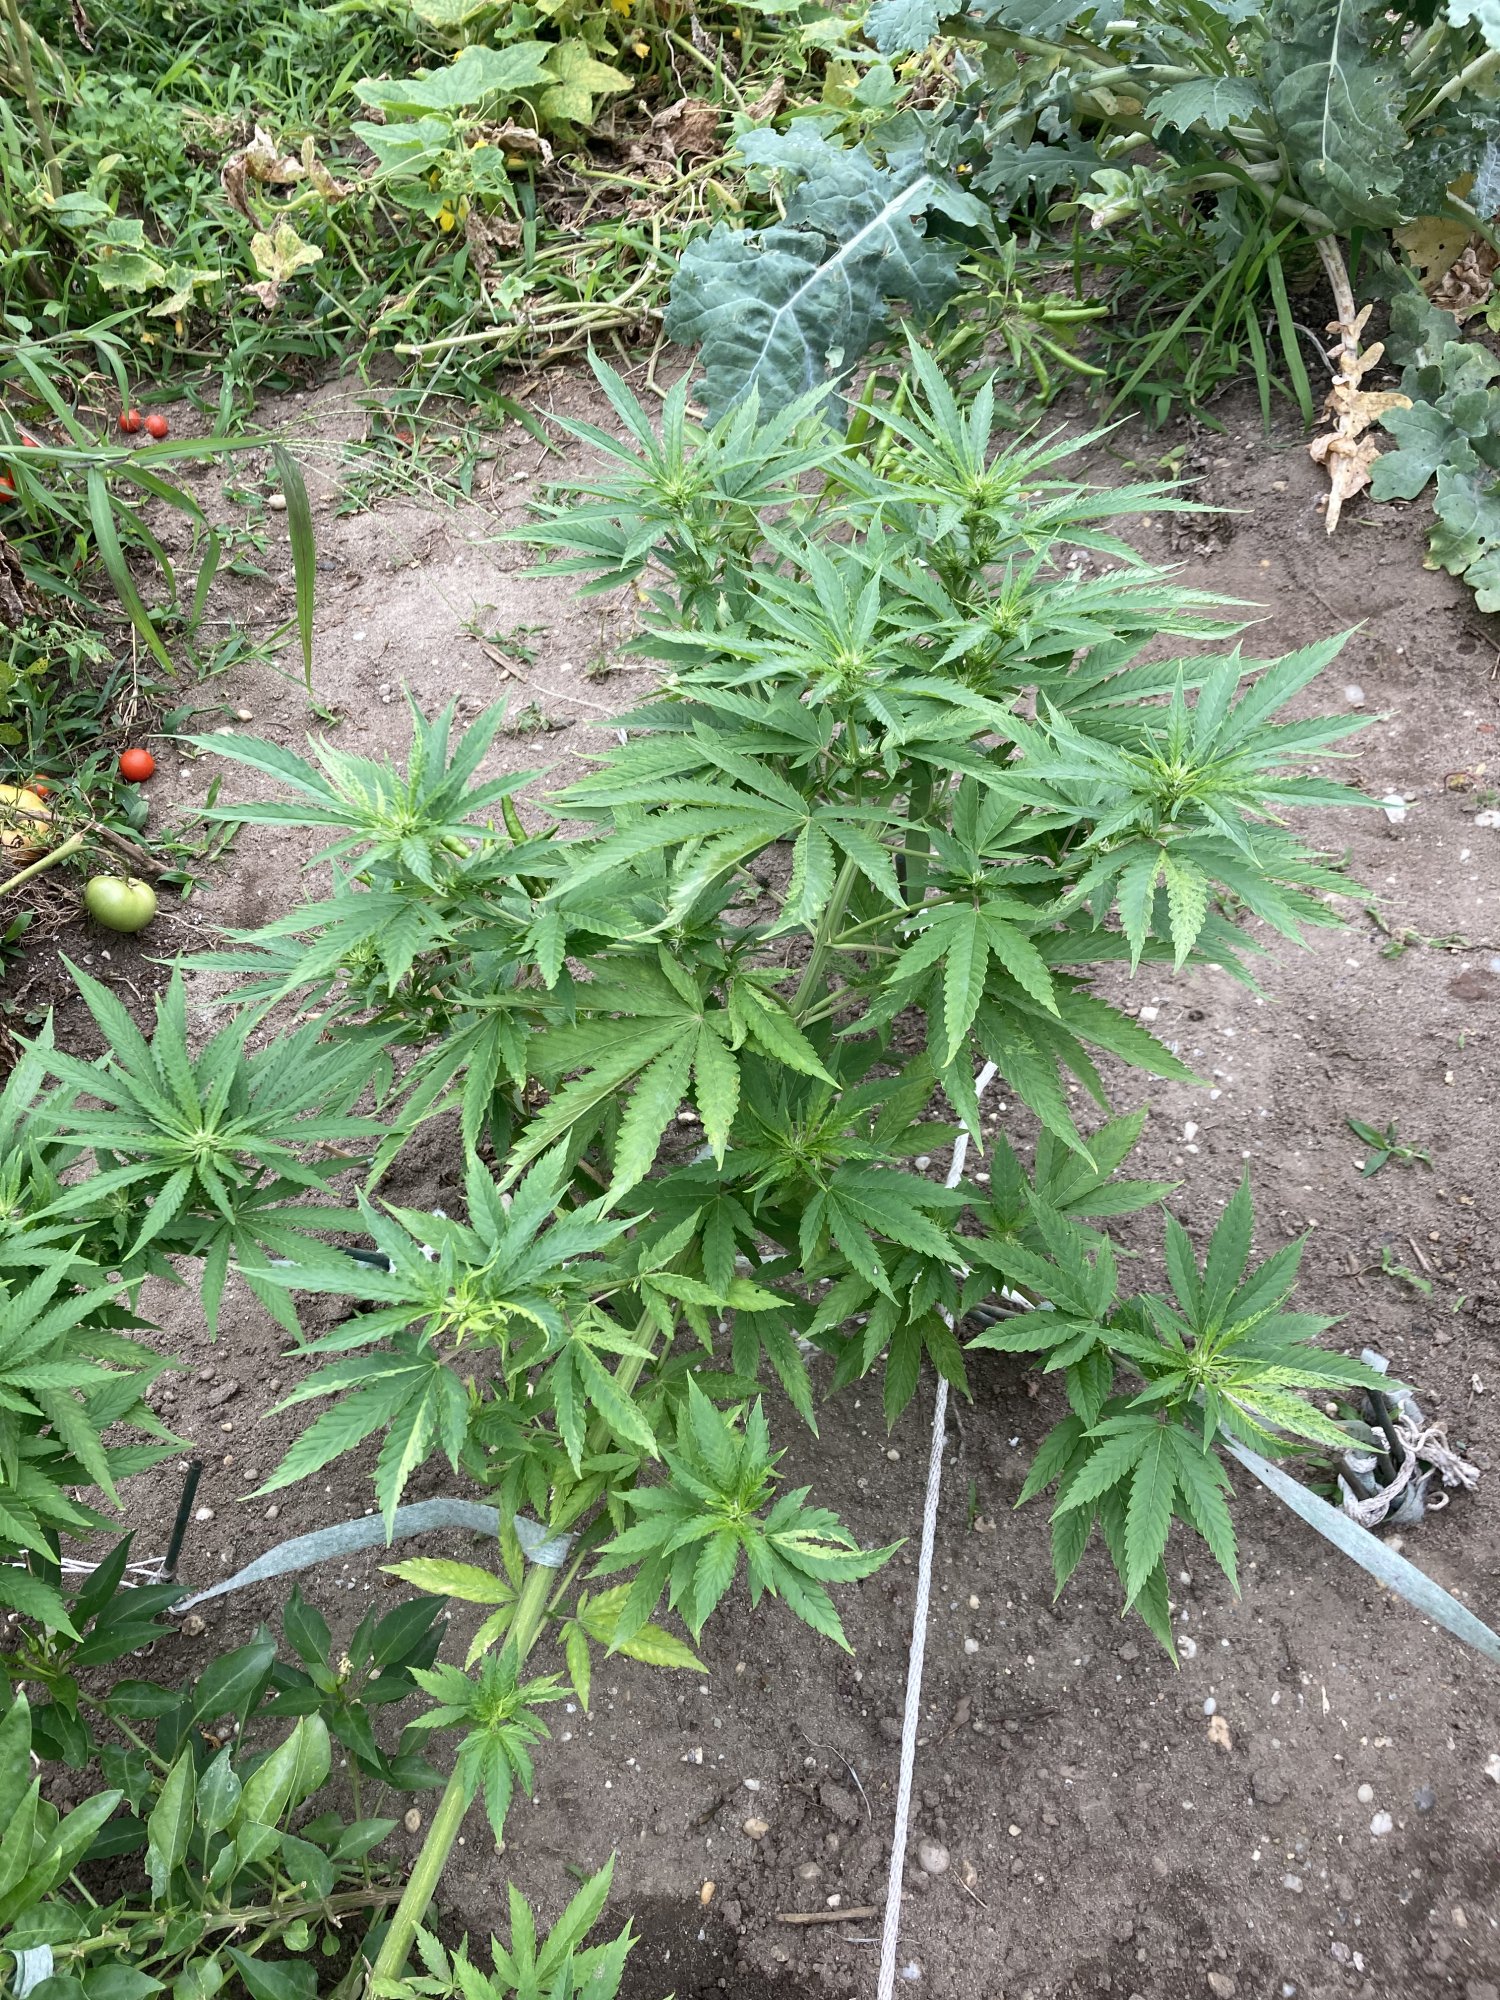 Unsure of nutrient burn or possible other issue outdoors first grow